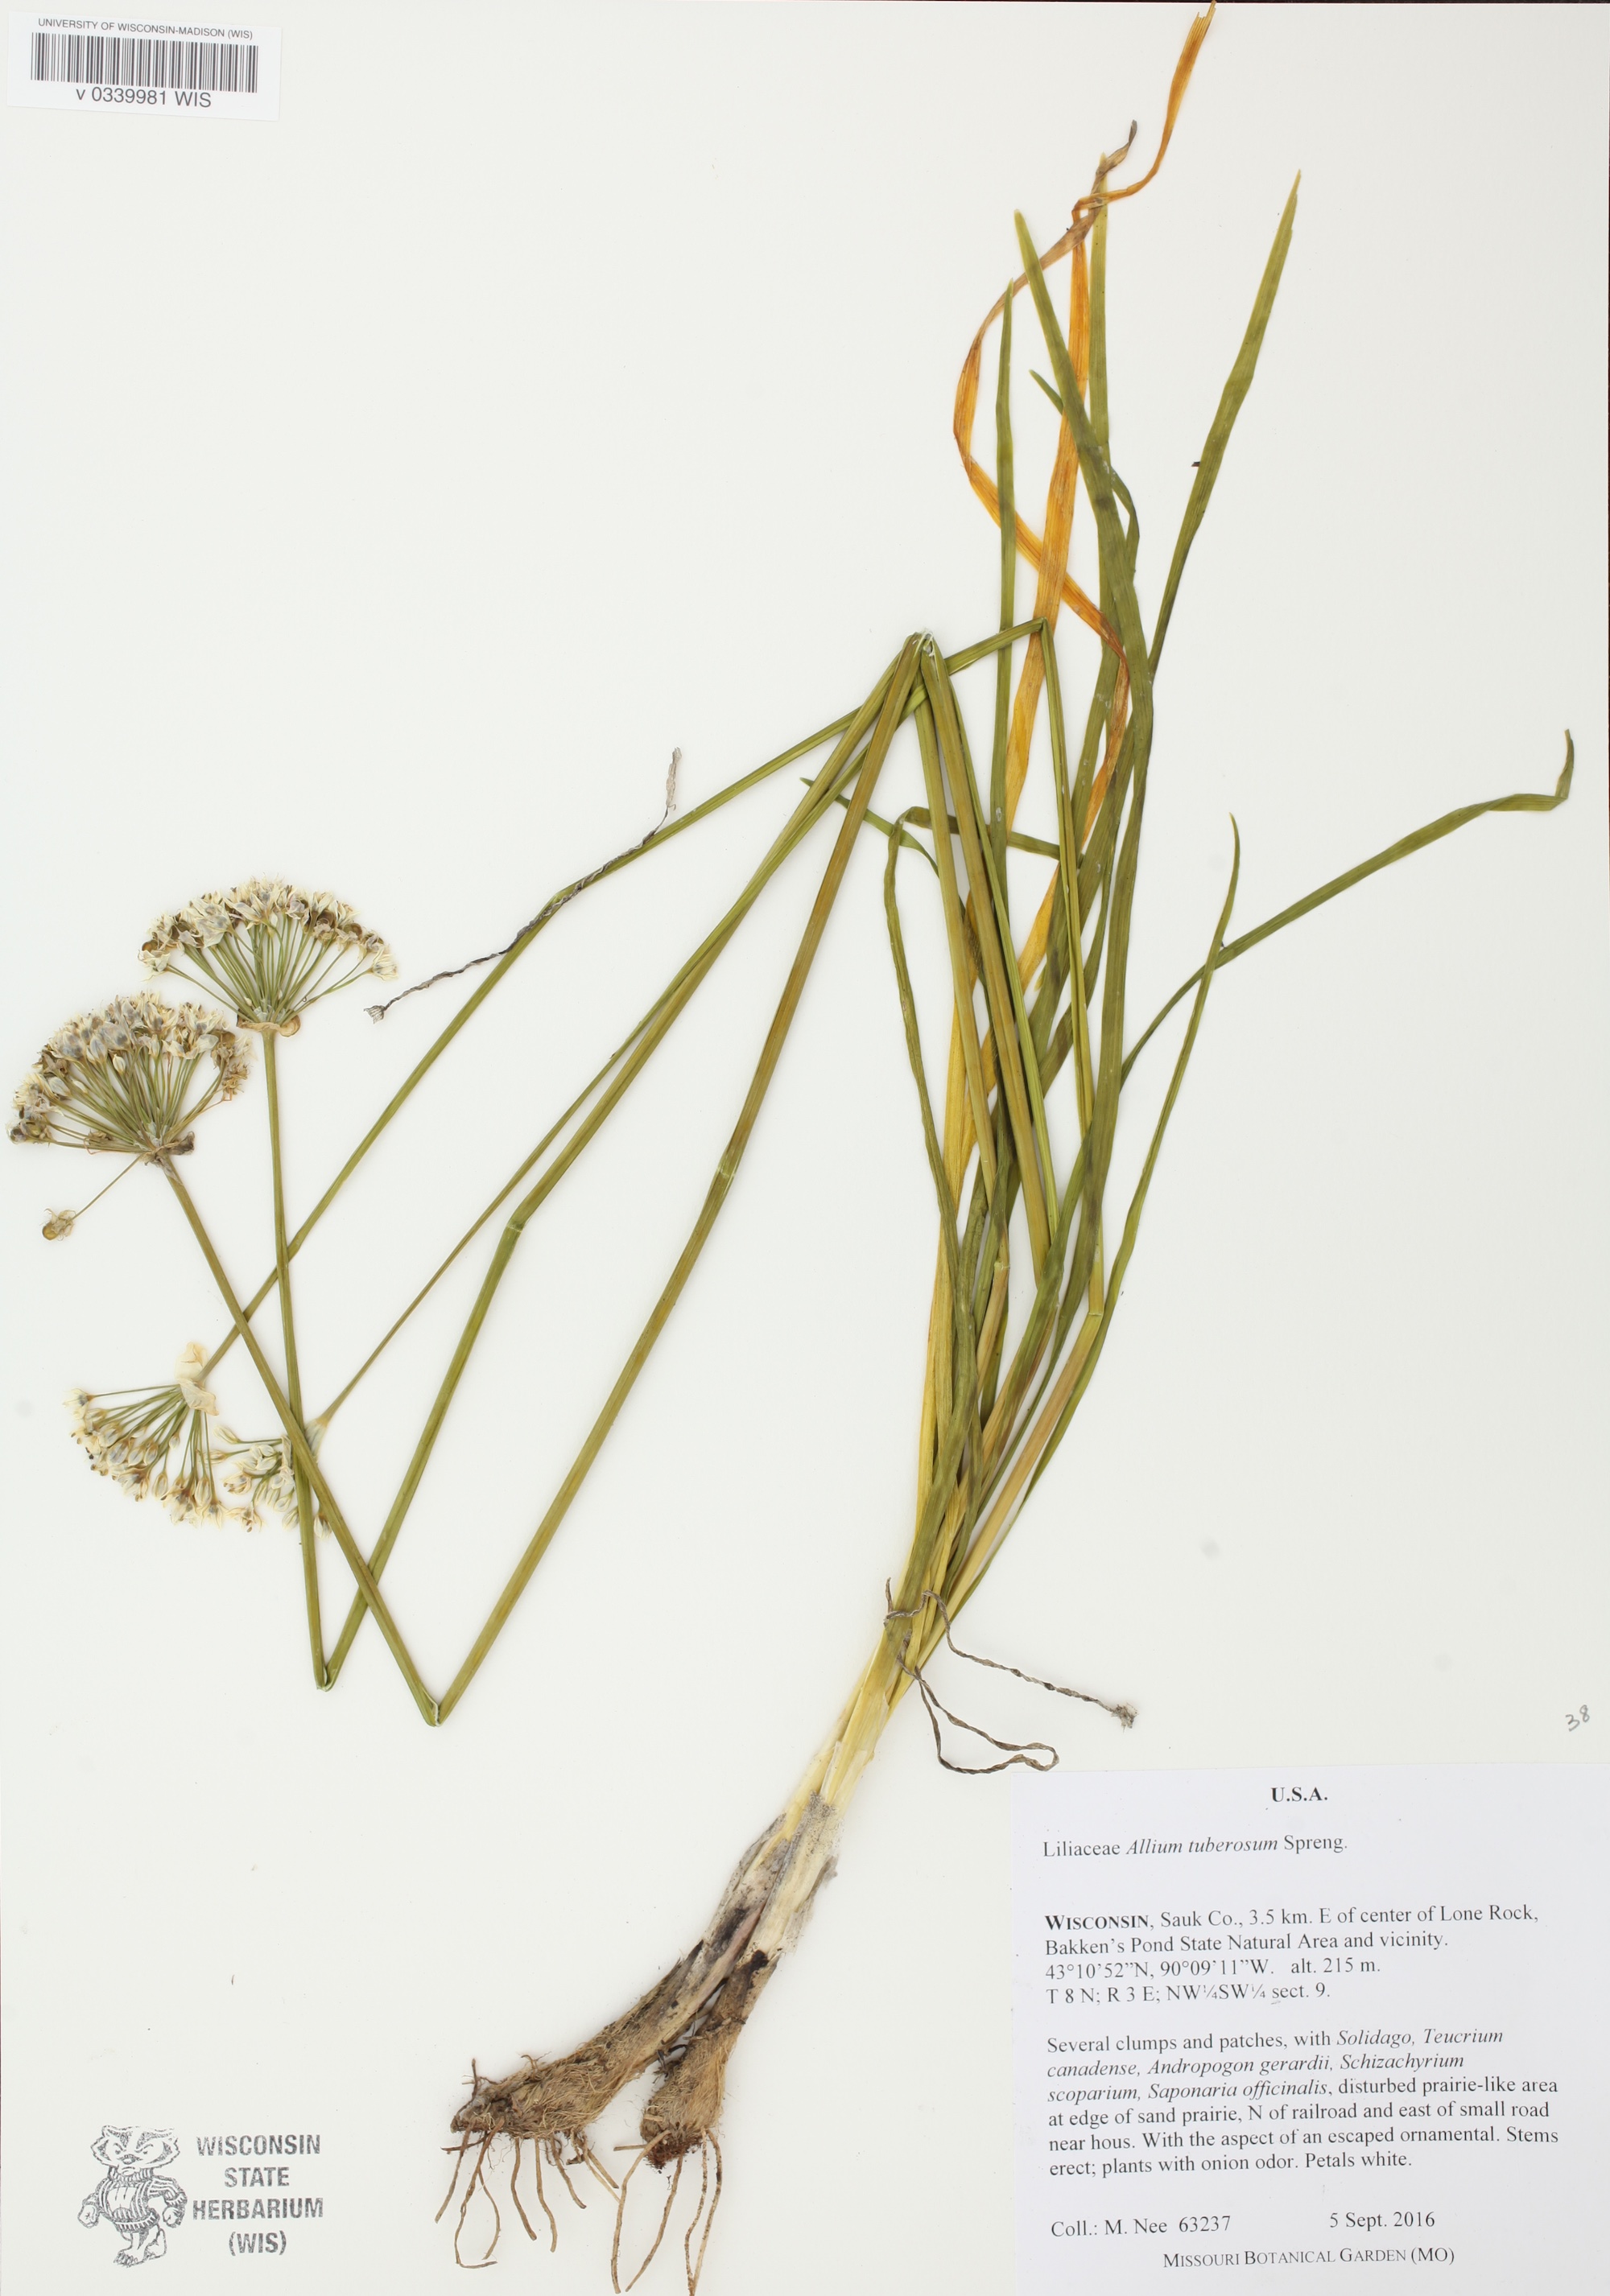 Garlic Chive specimen collected September 5, 2016 in Sauk County, Wisconsin in the Bakken's Pond State Natural area.